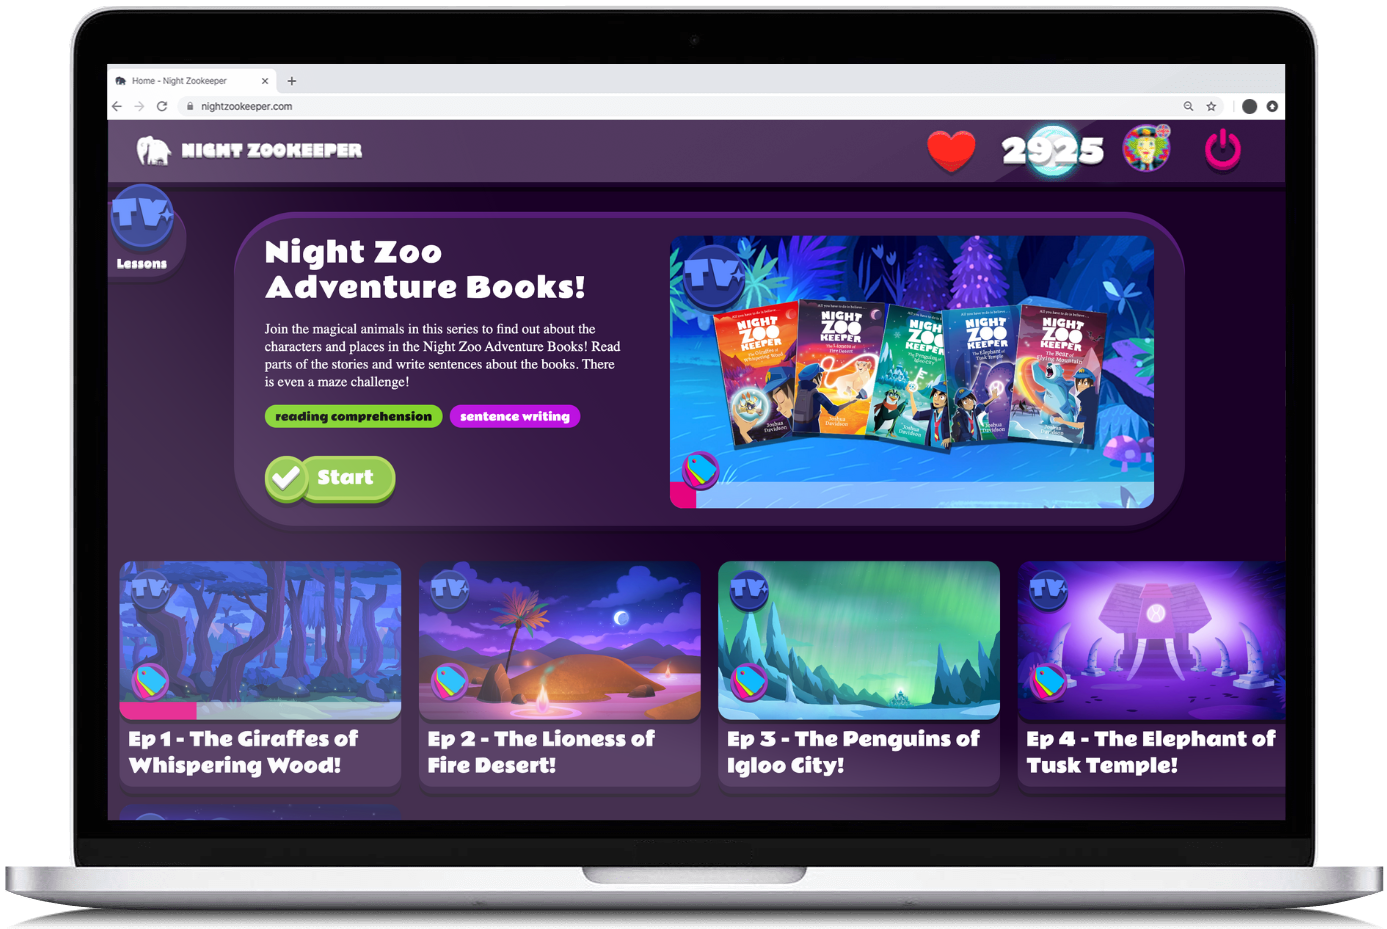 Reading comprehension lesson series on Nightzookeeper.com.